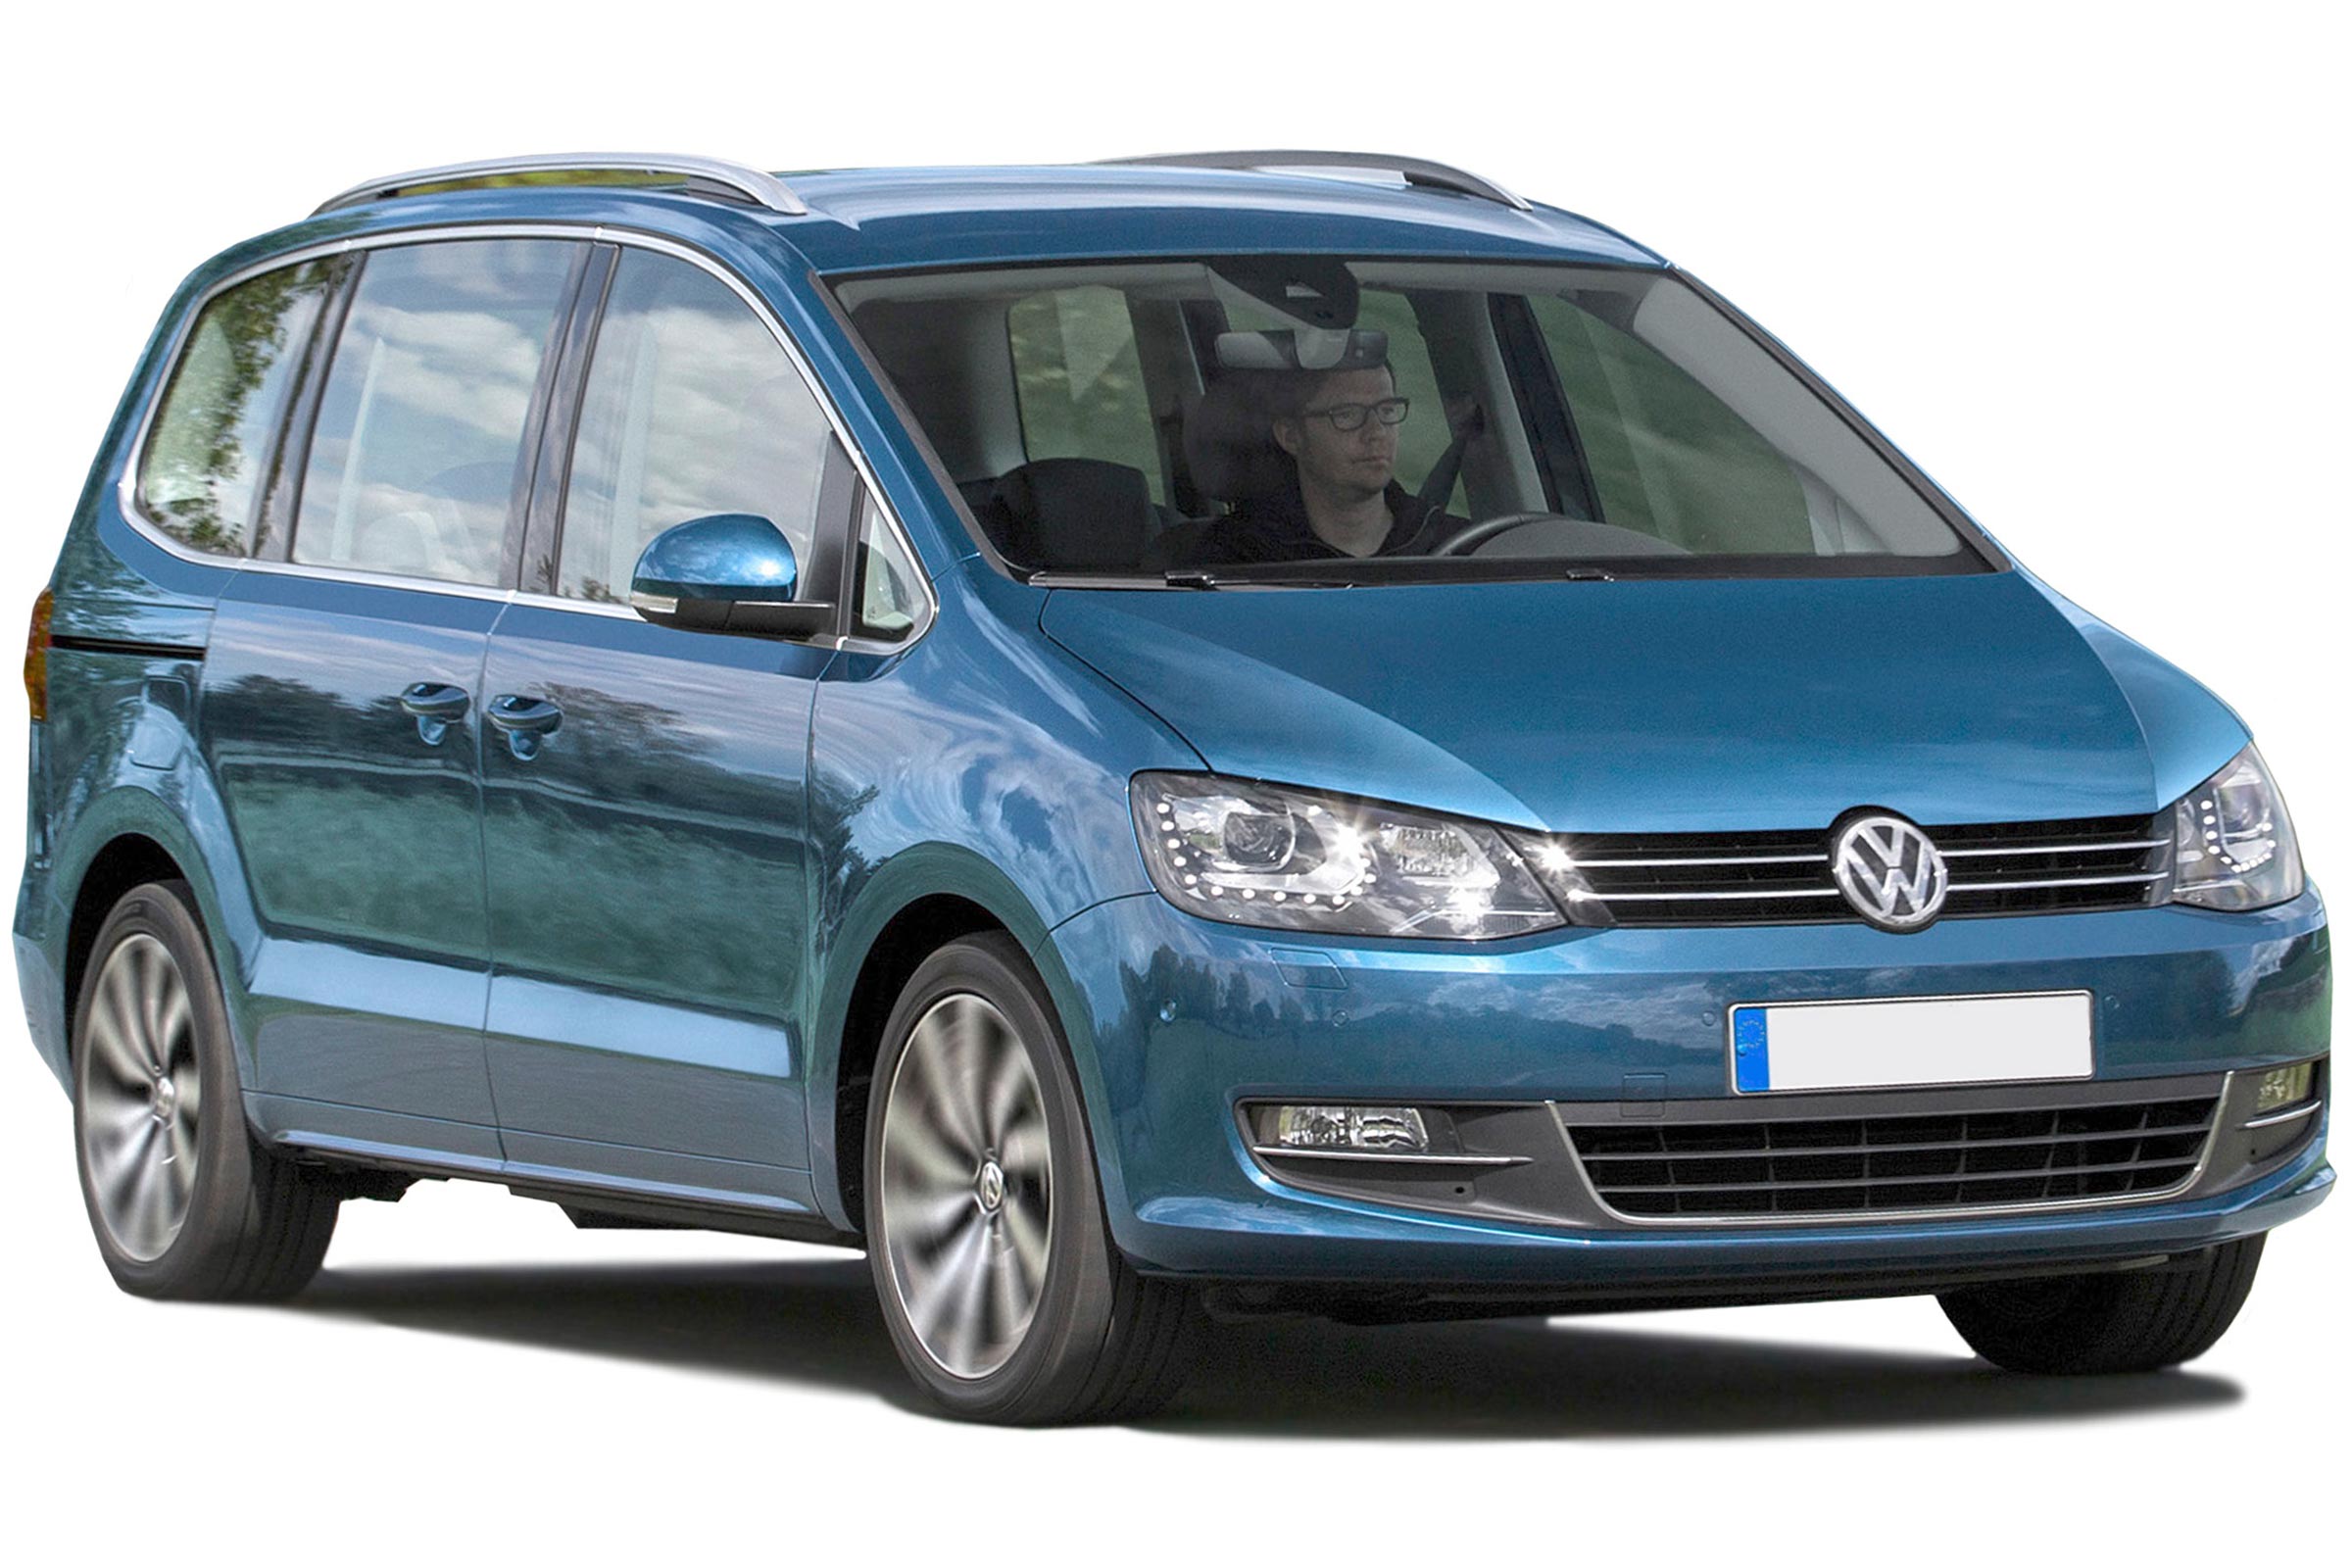 https://mediacloud.carbuyer.co.uk/image/private/s--lImOWluh--/v1584464176/carbuyer/car_images/volkswagen-sharan-cutout.jpg